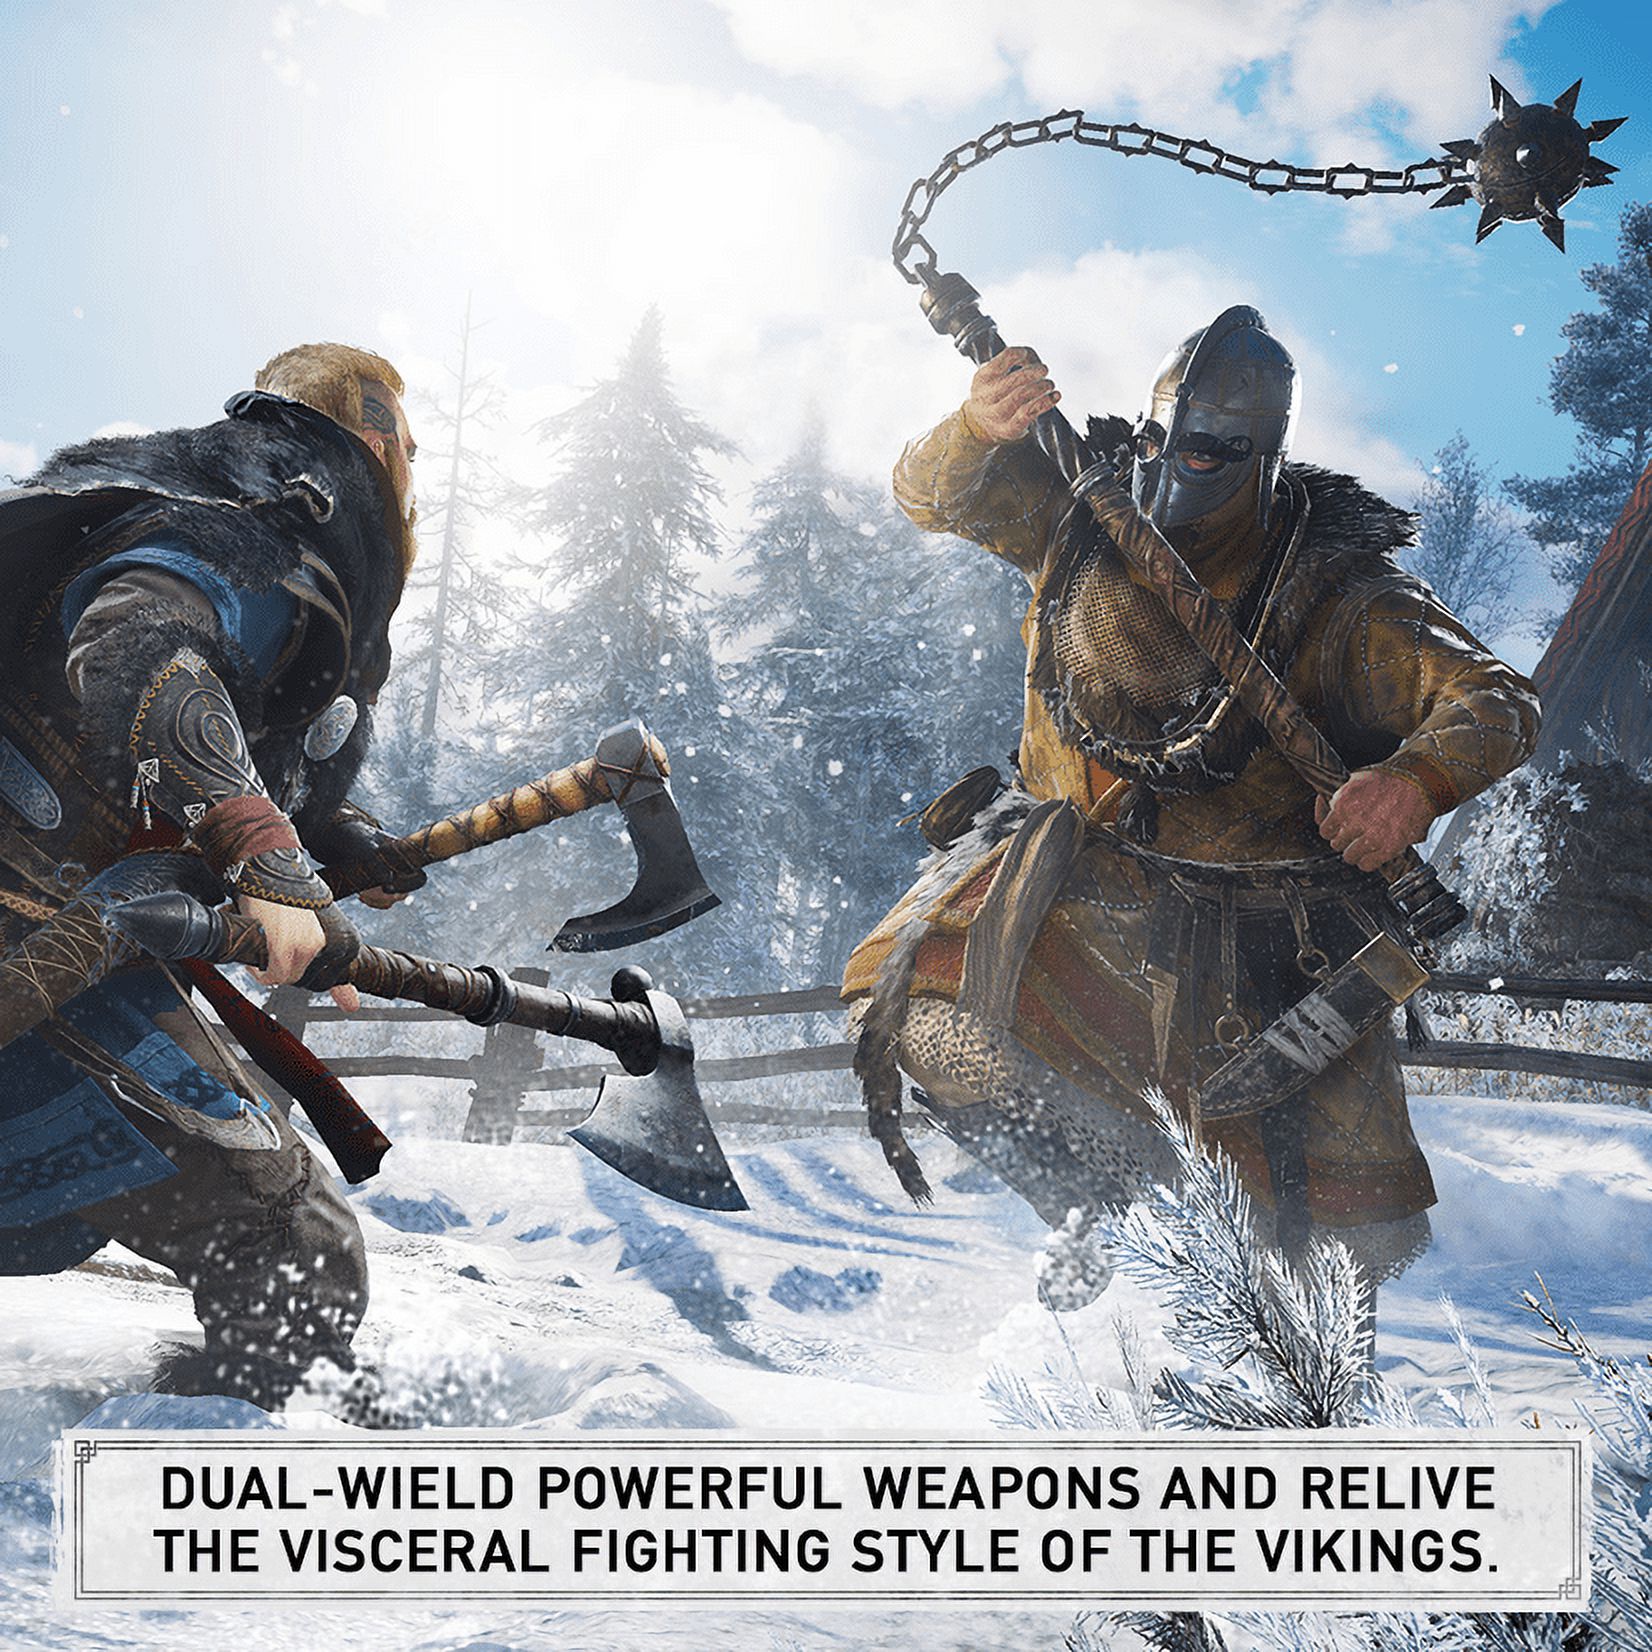 Assassin's Creed Valhalla PlayStation 4 Standard Edition with free upgrade to the digital PS5 version - image 3 of 6